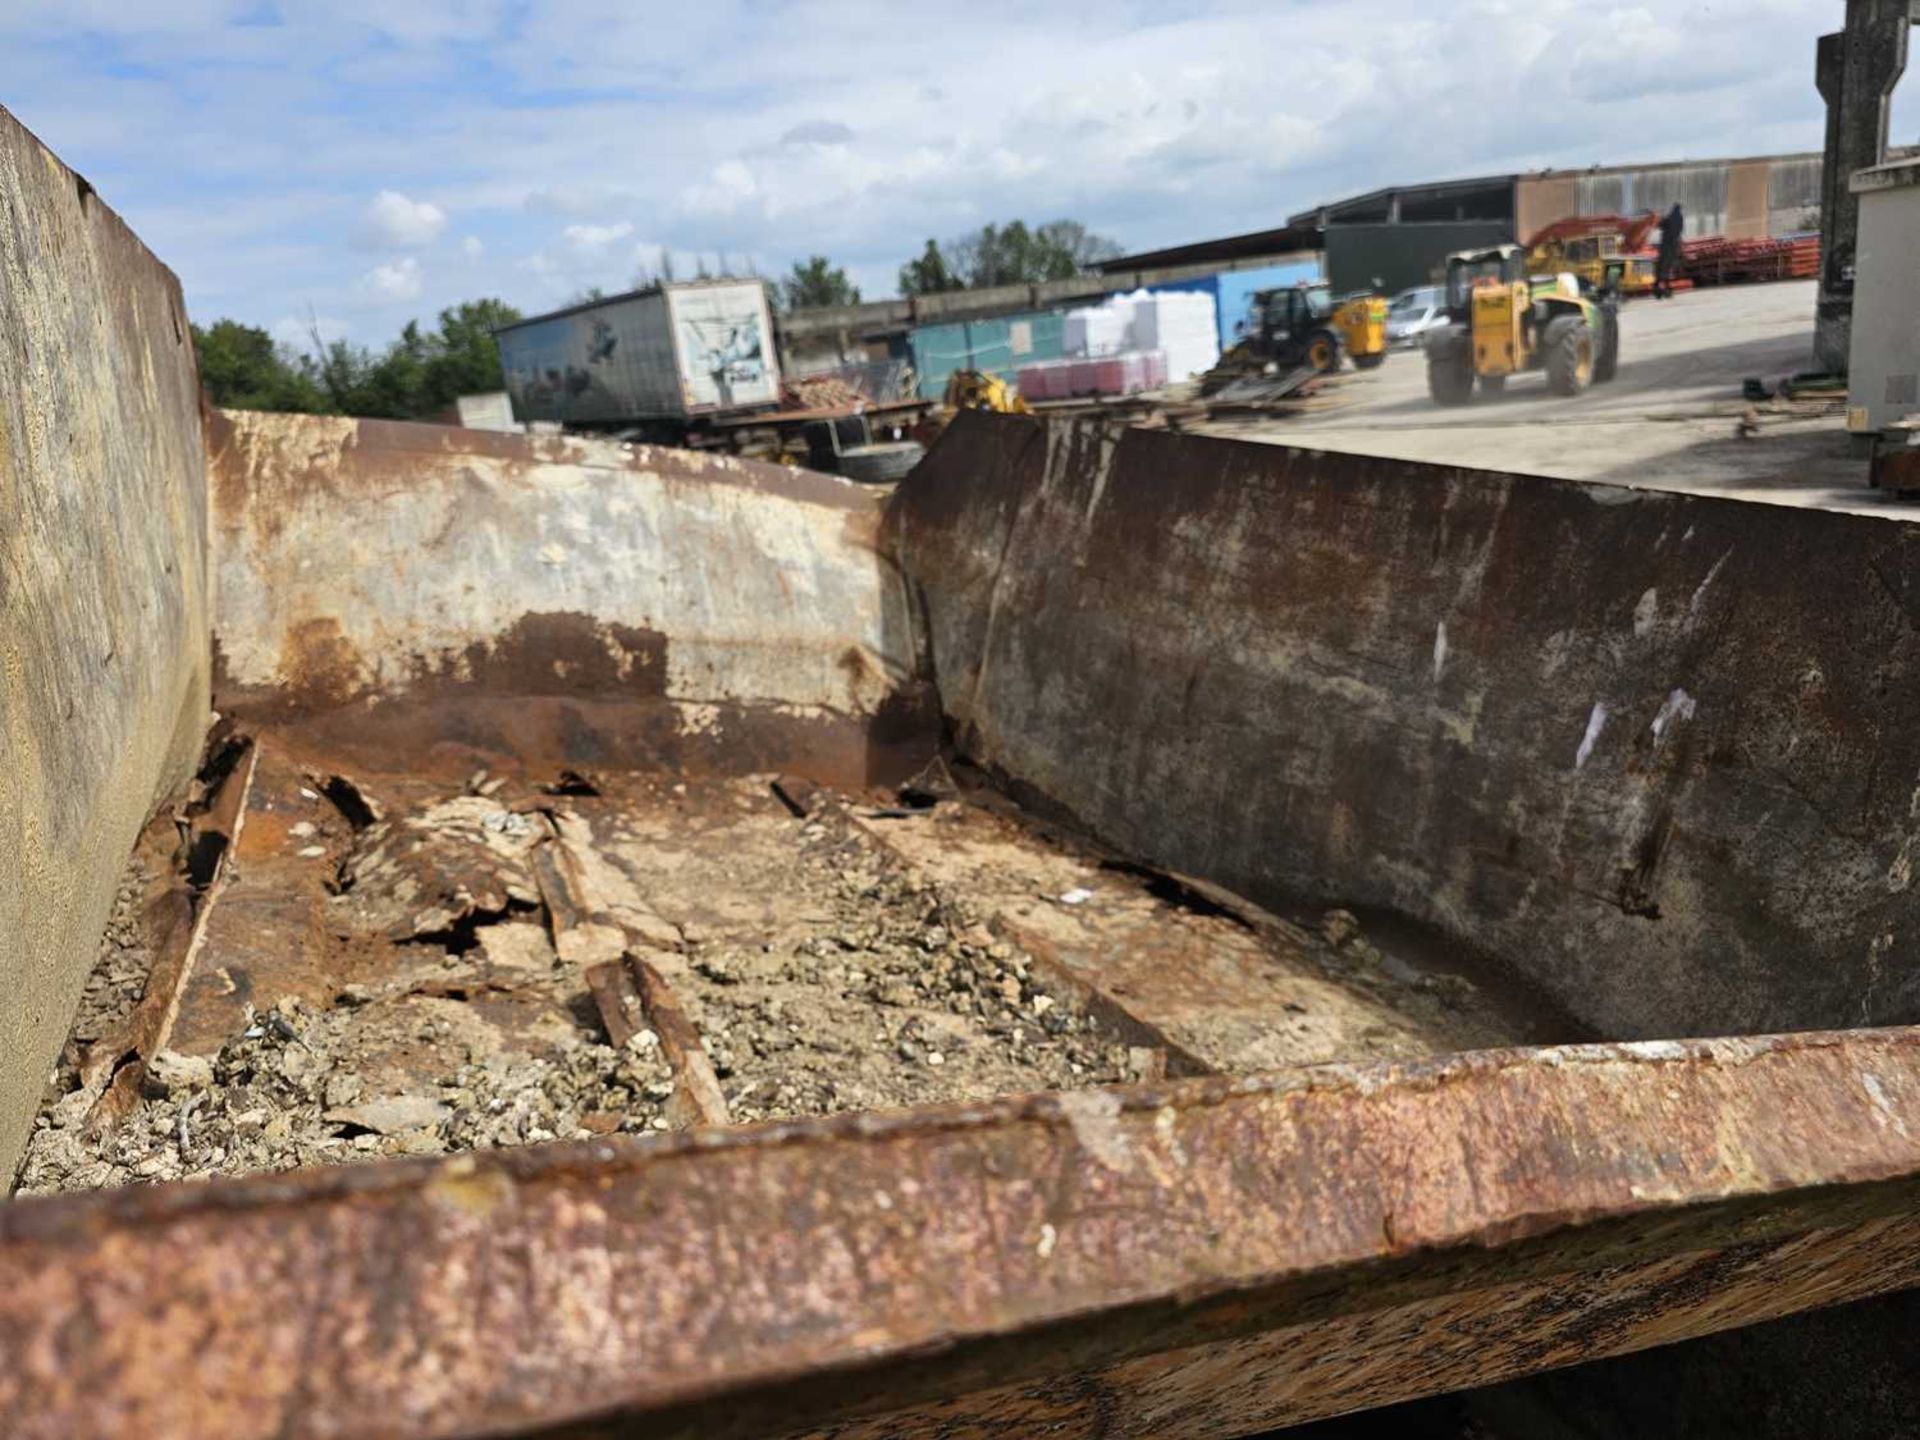 Selection of Skips to suit Skip Loader Lorry (4 of) - Image 6 of 6